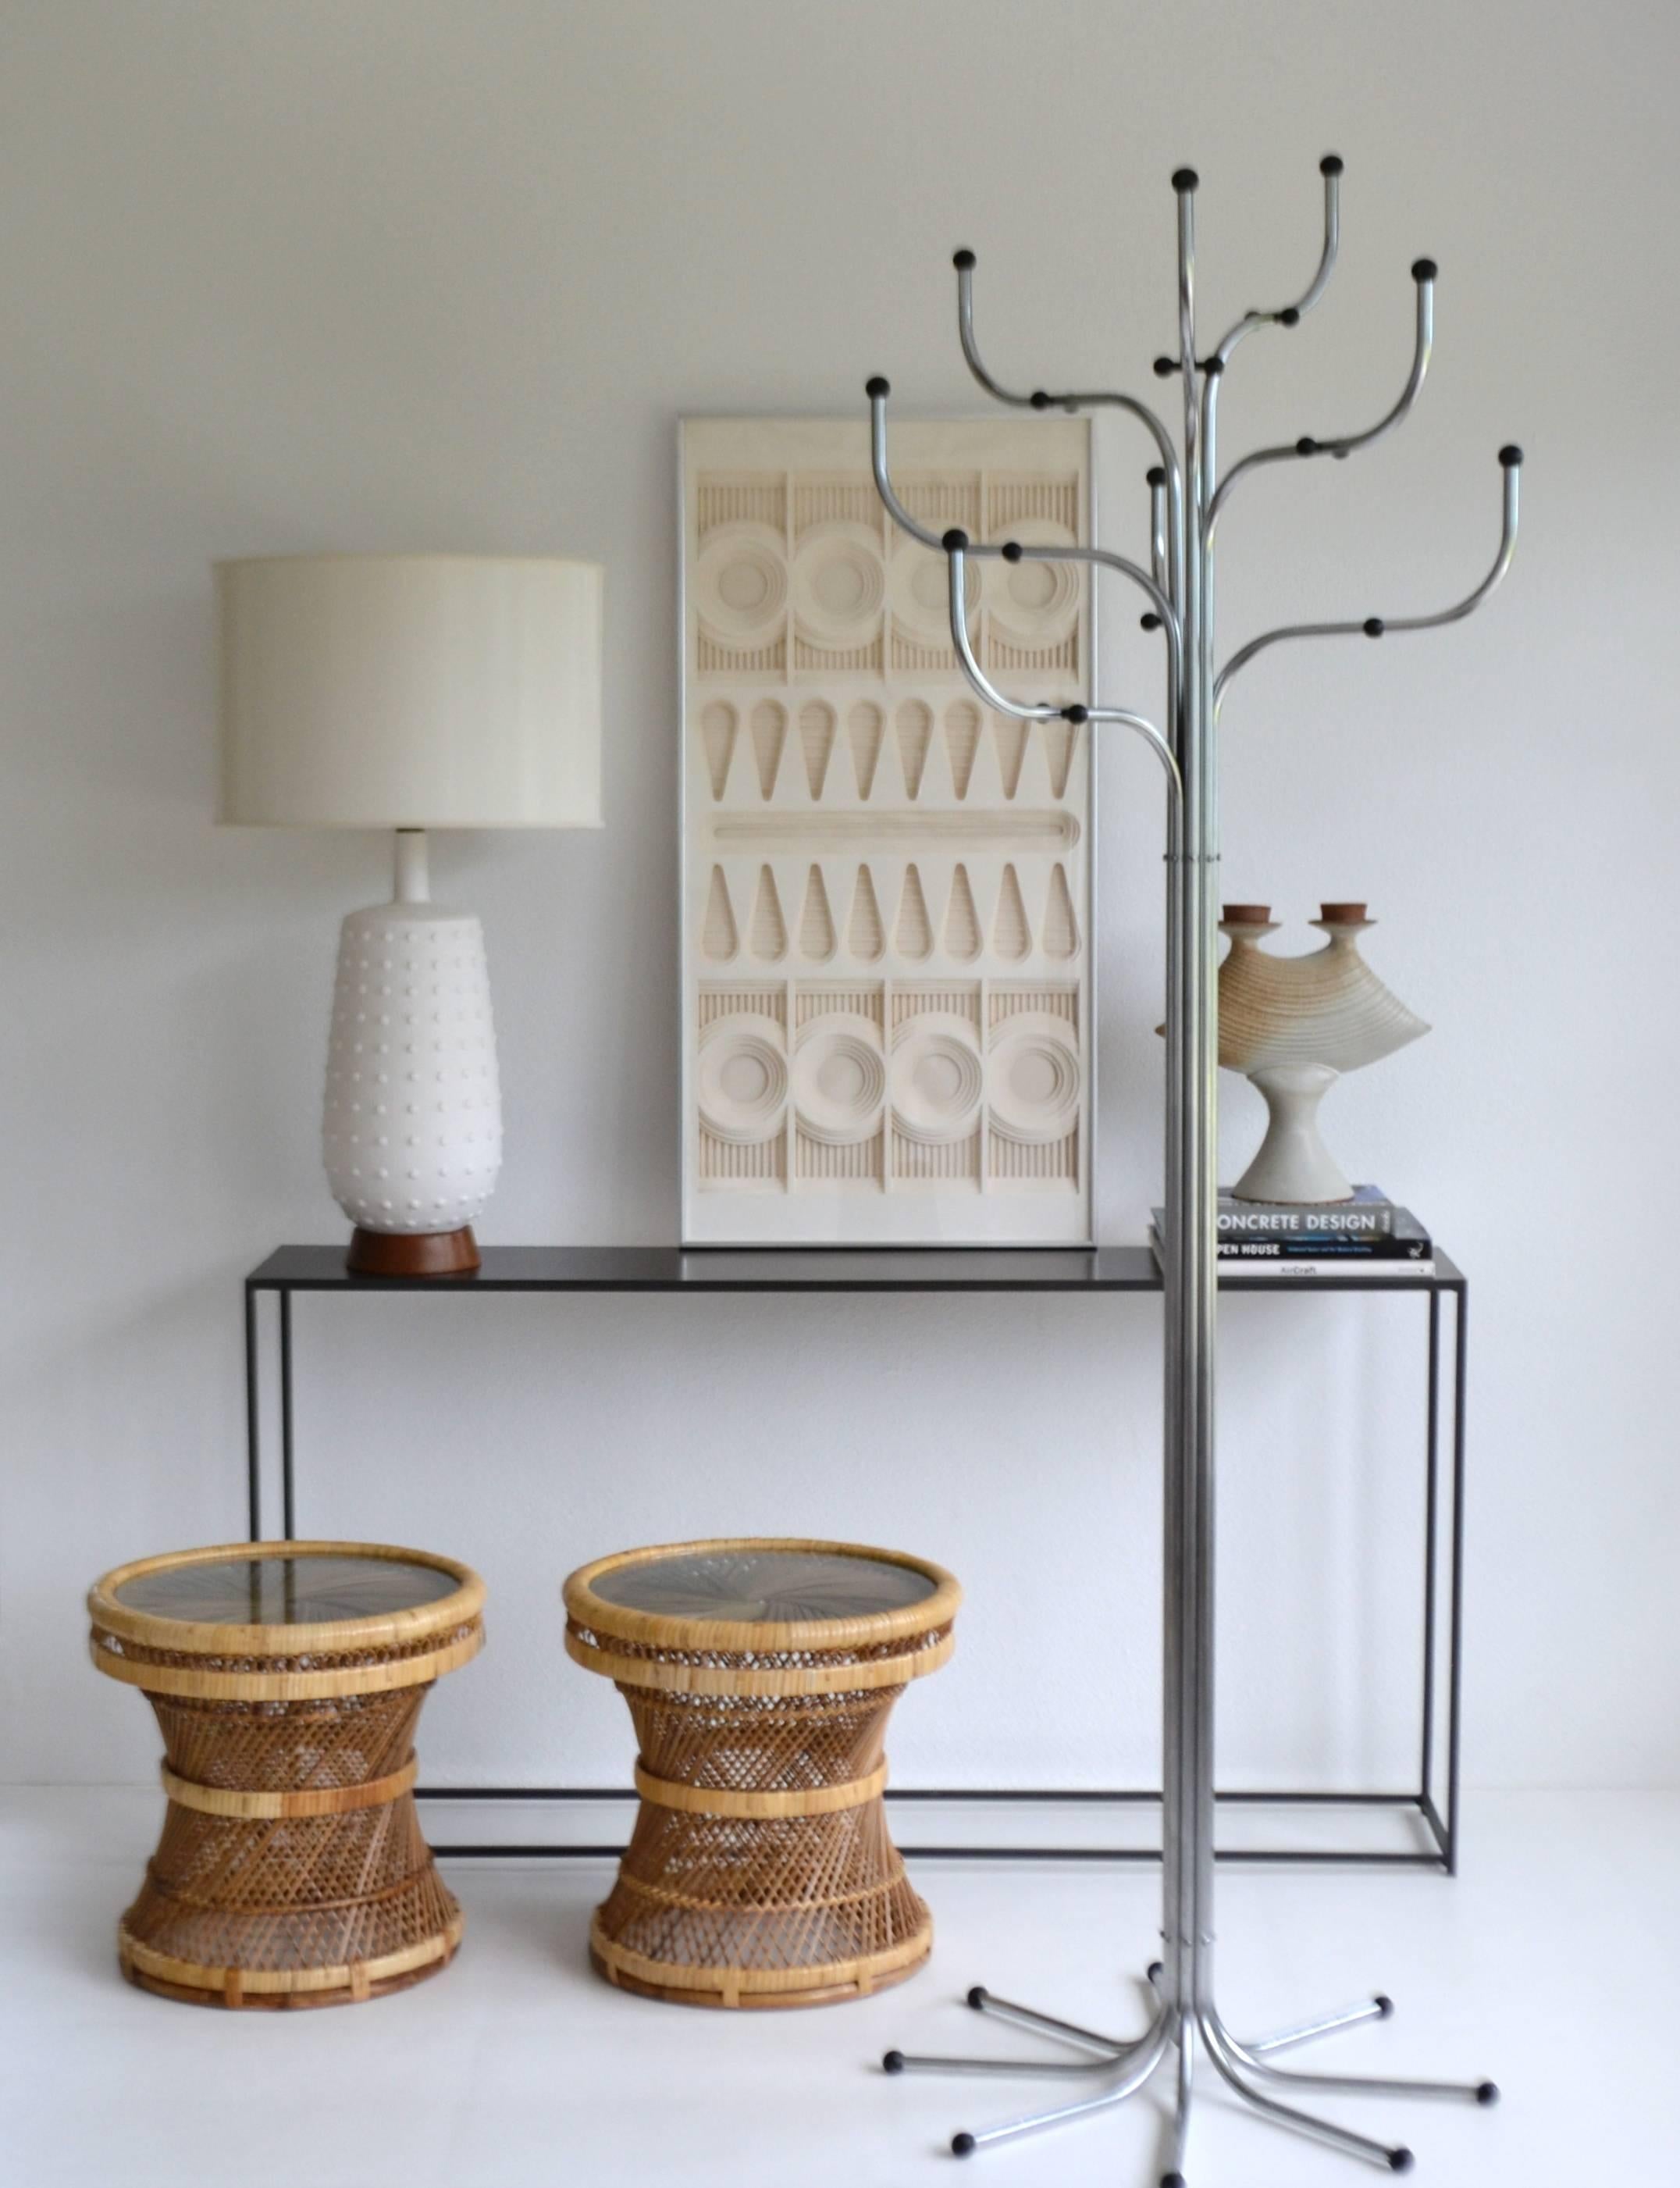 Striking pair of Mid-Century natural woven rattan drum occasional tables or side tables, circa 1960s-1970s. These incredible end tables or drinks tables are designed with intricately webbed rattan and outfitted with round inset glass tops.